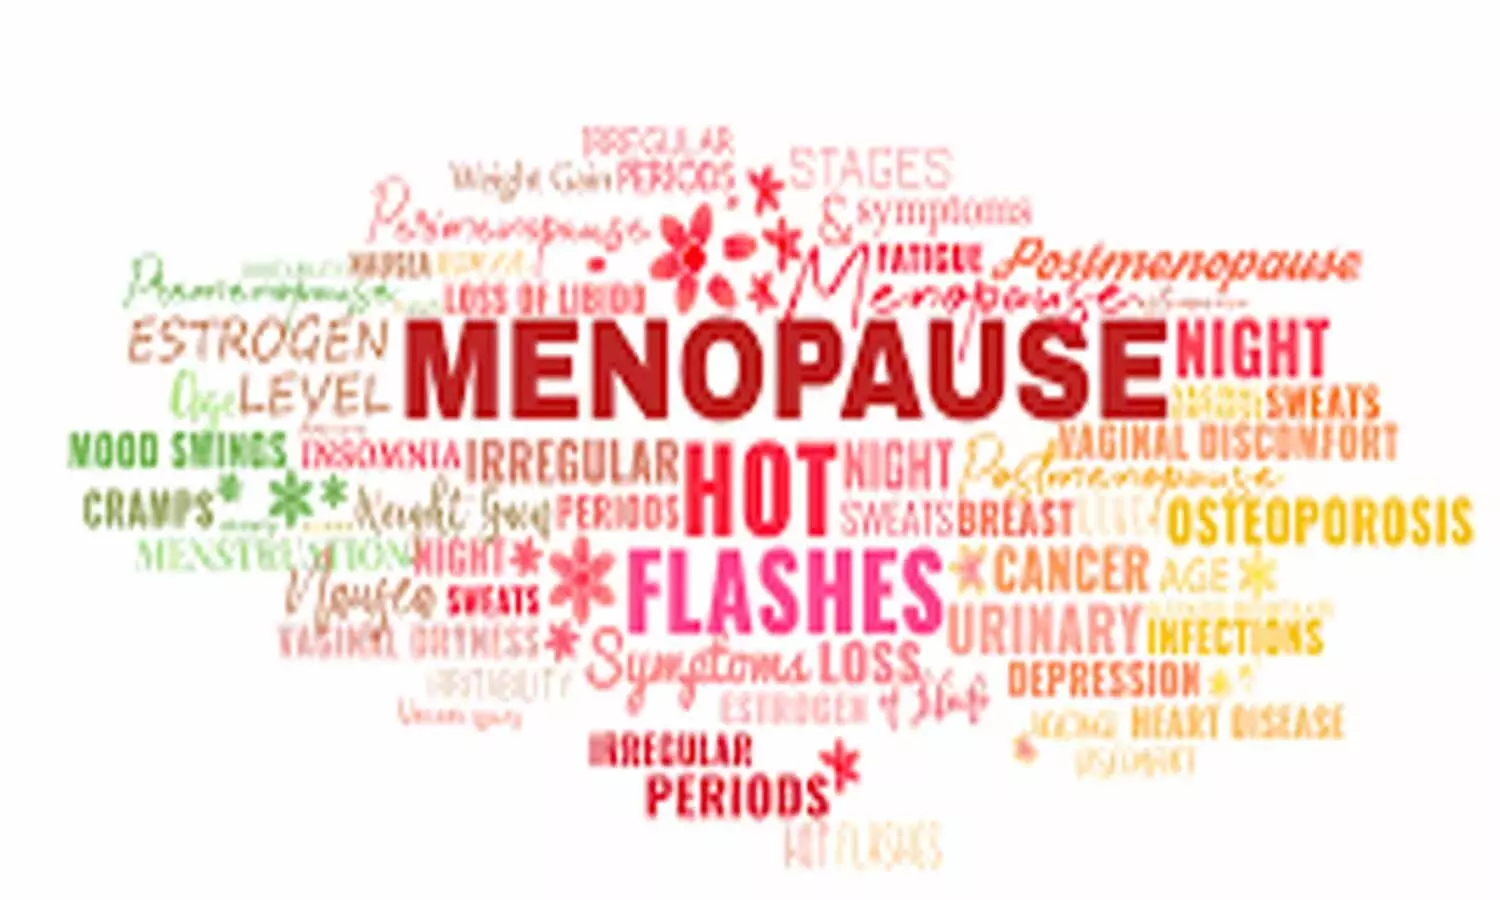 Physical activity could mitigate difficult menopausal symptoms